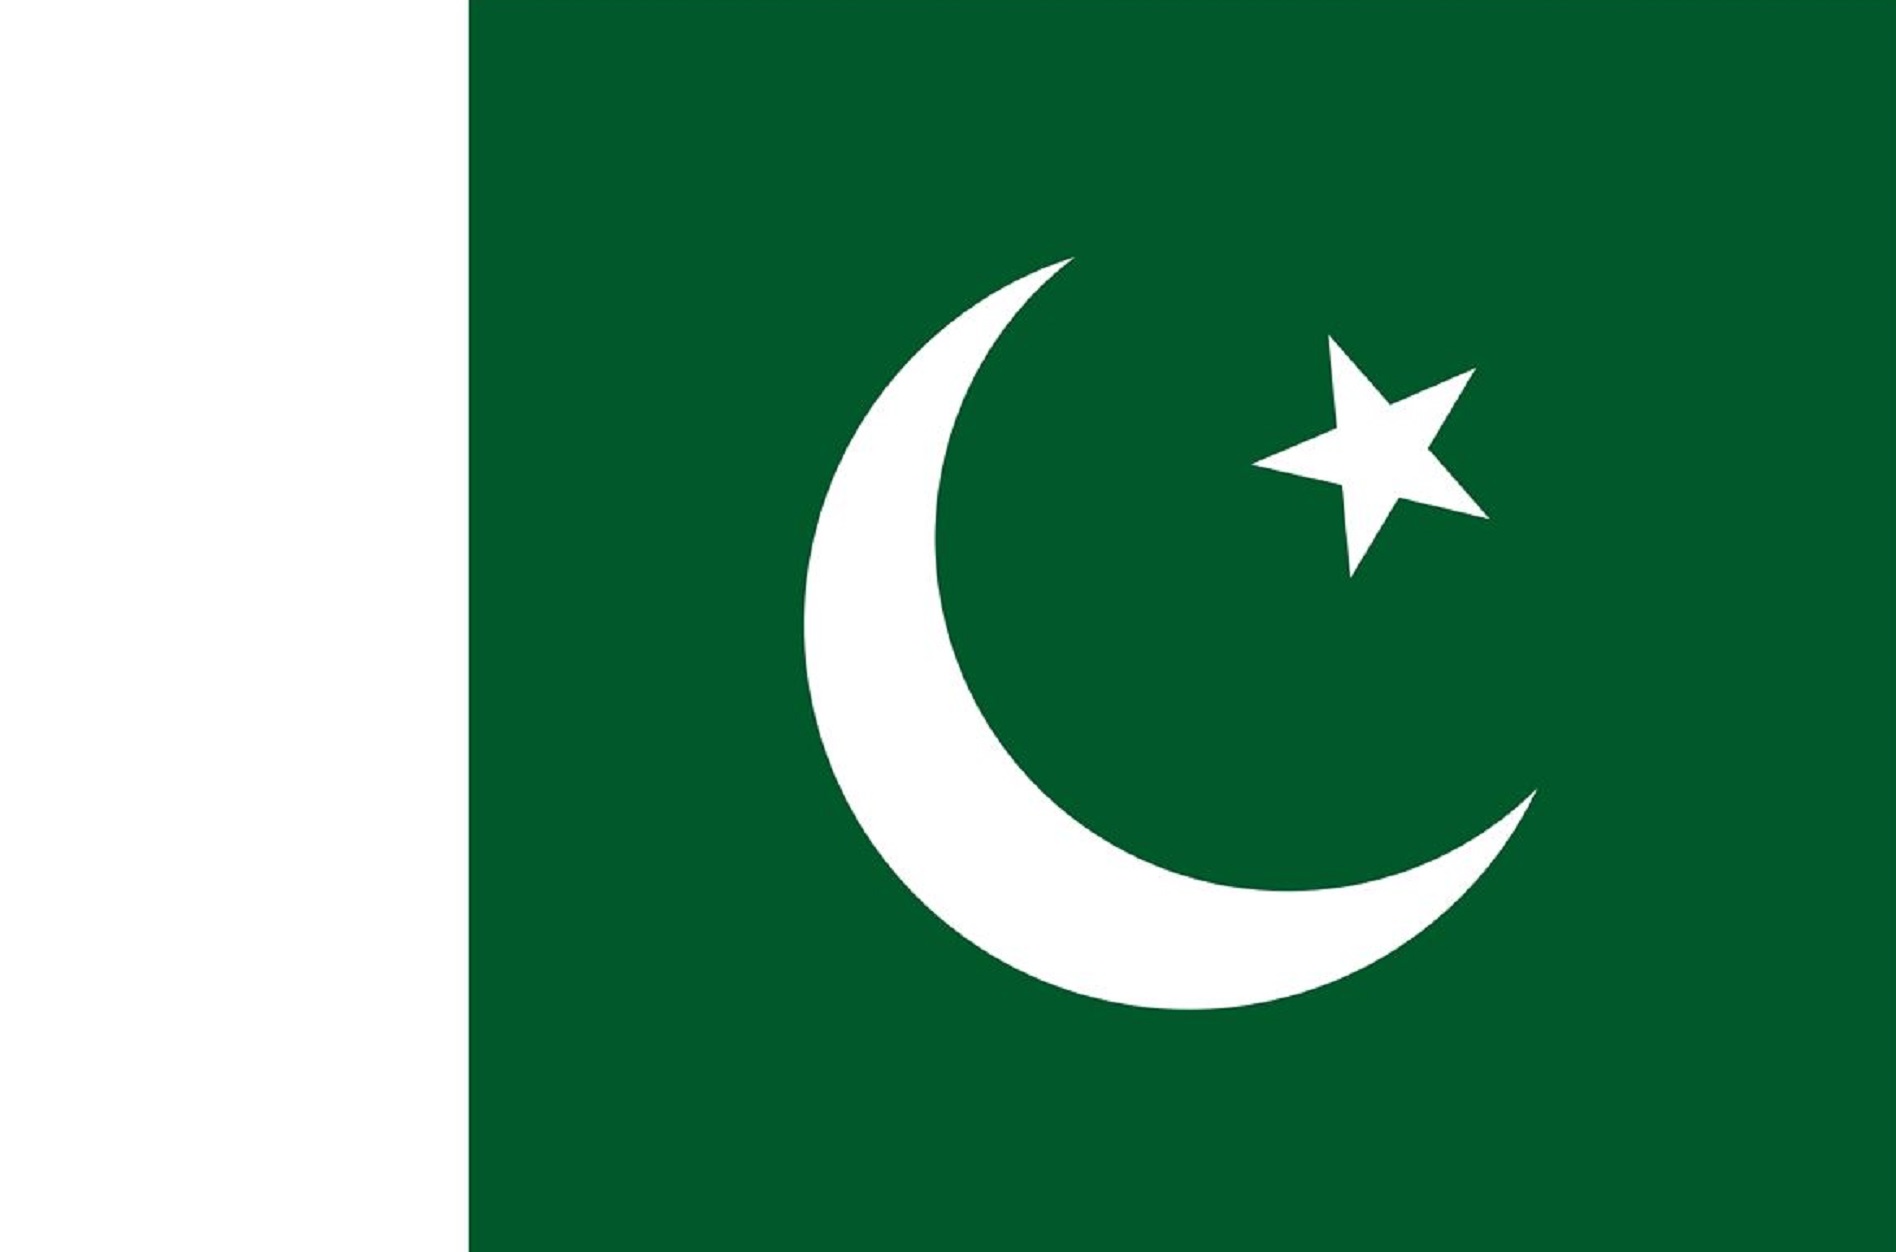 official flag of pakistan image